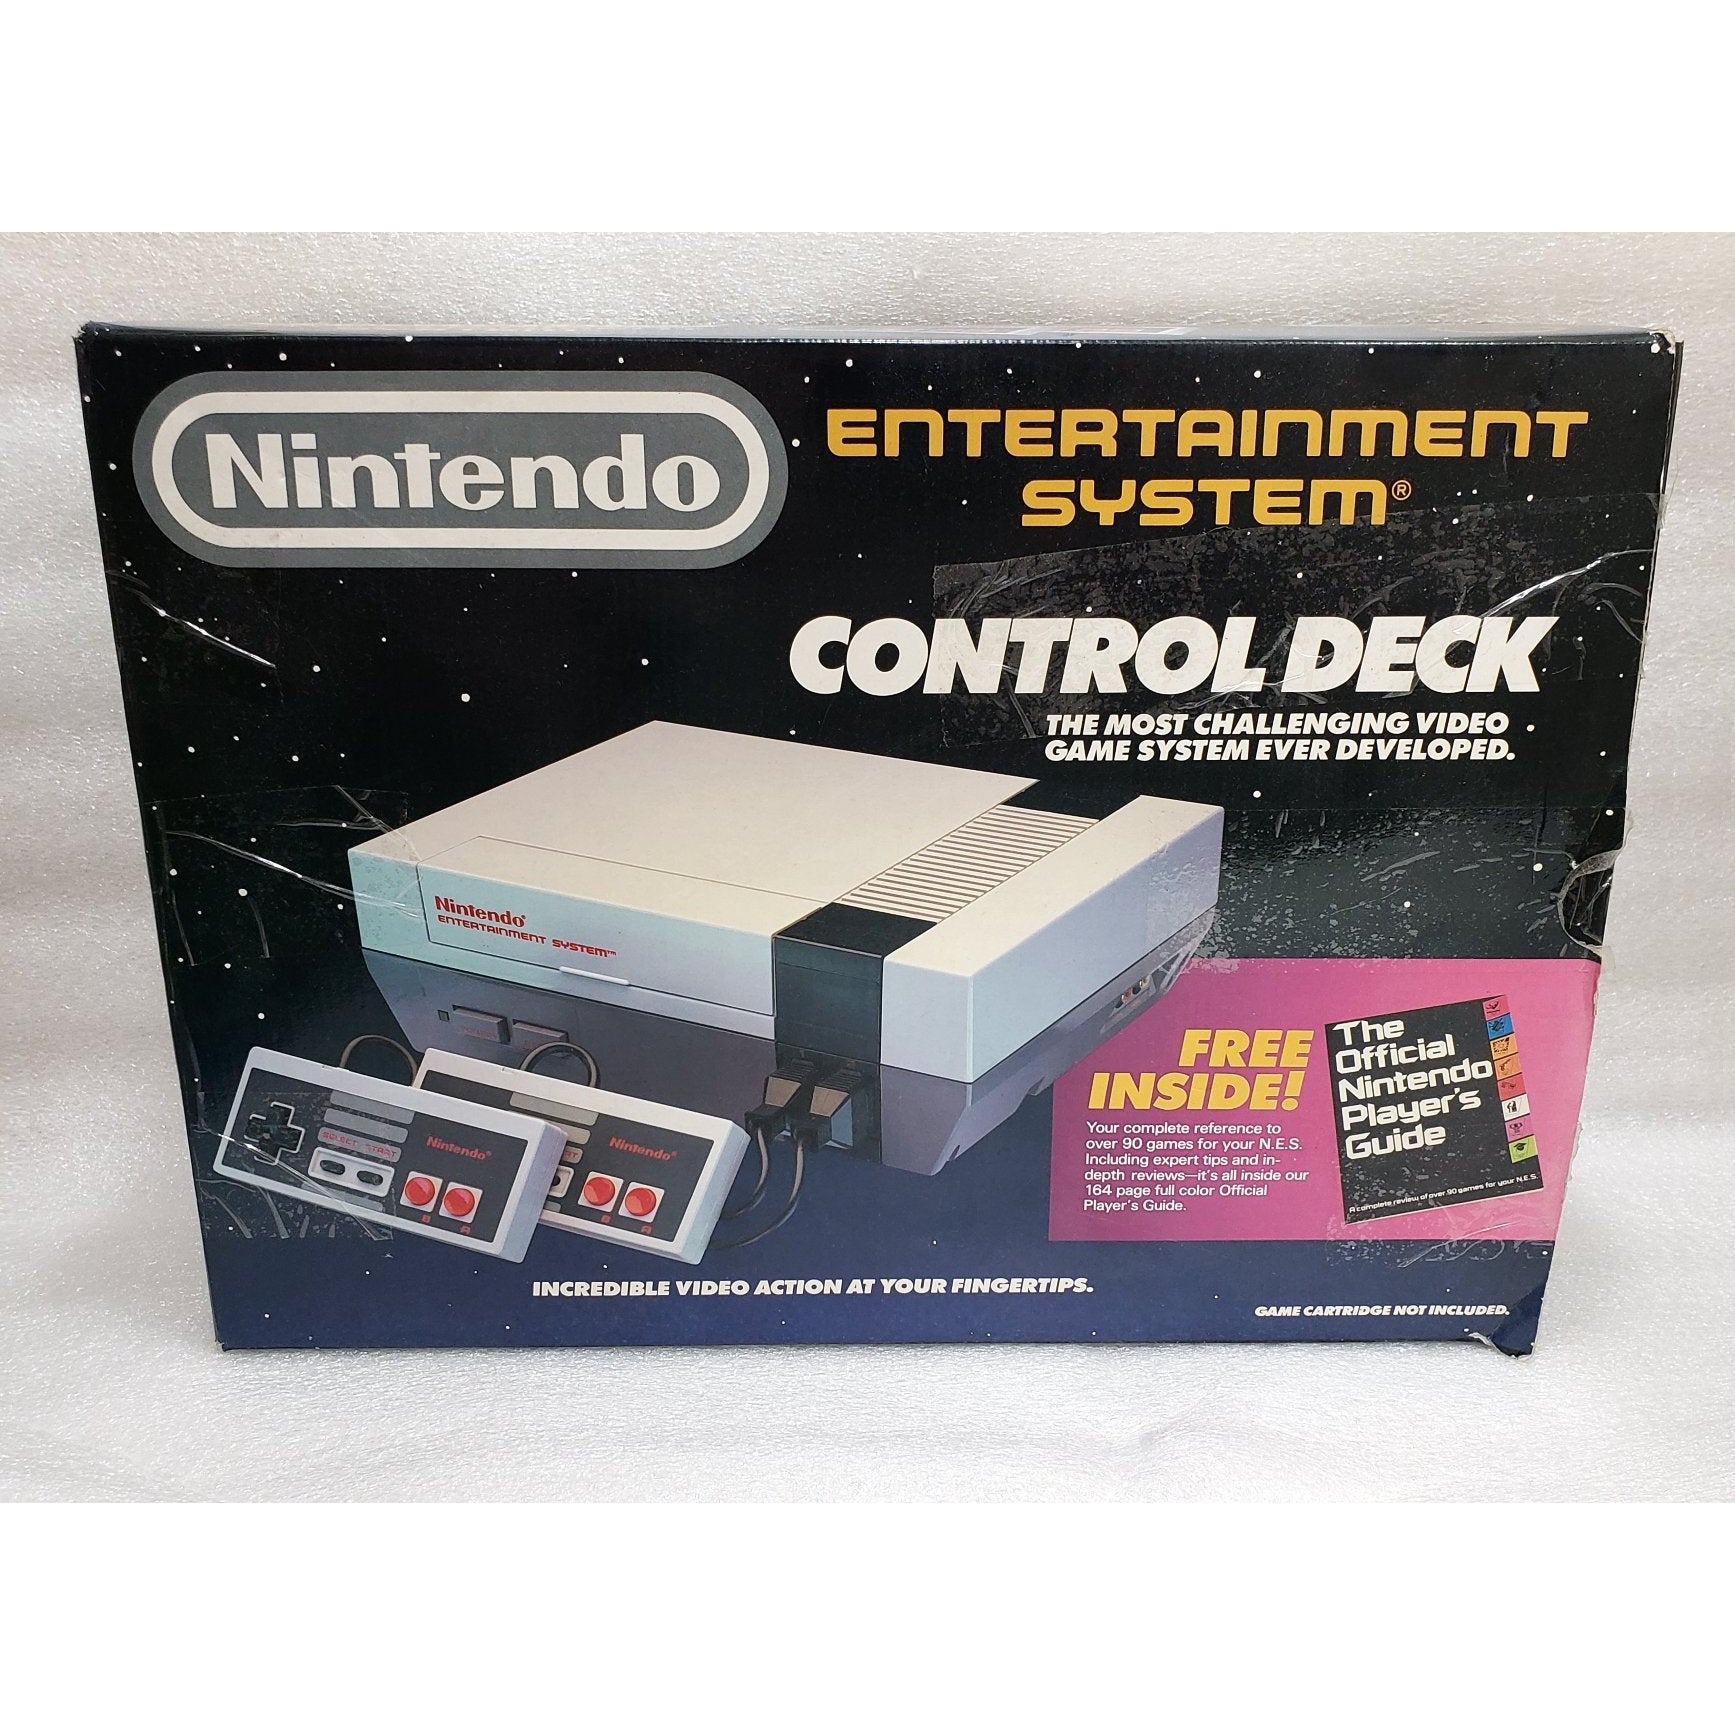 Your Gaming Shop - Nintendo Entertainment System (NES) Control Deck Complete In Box